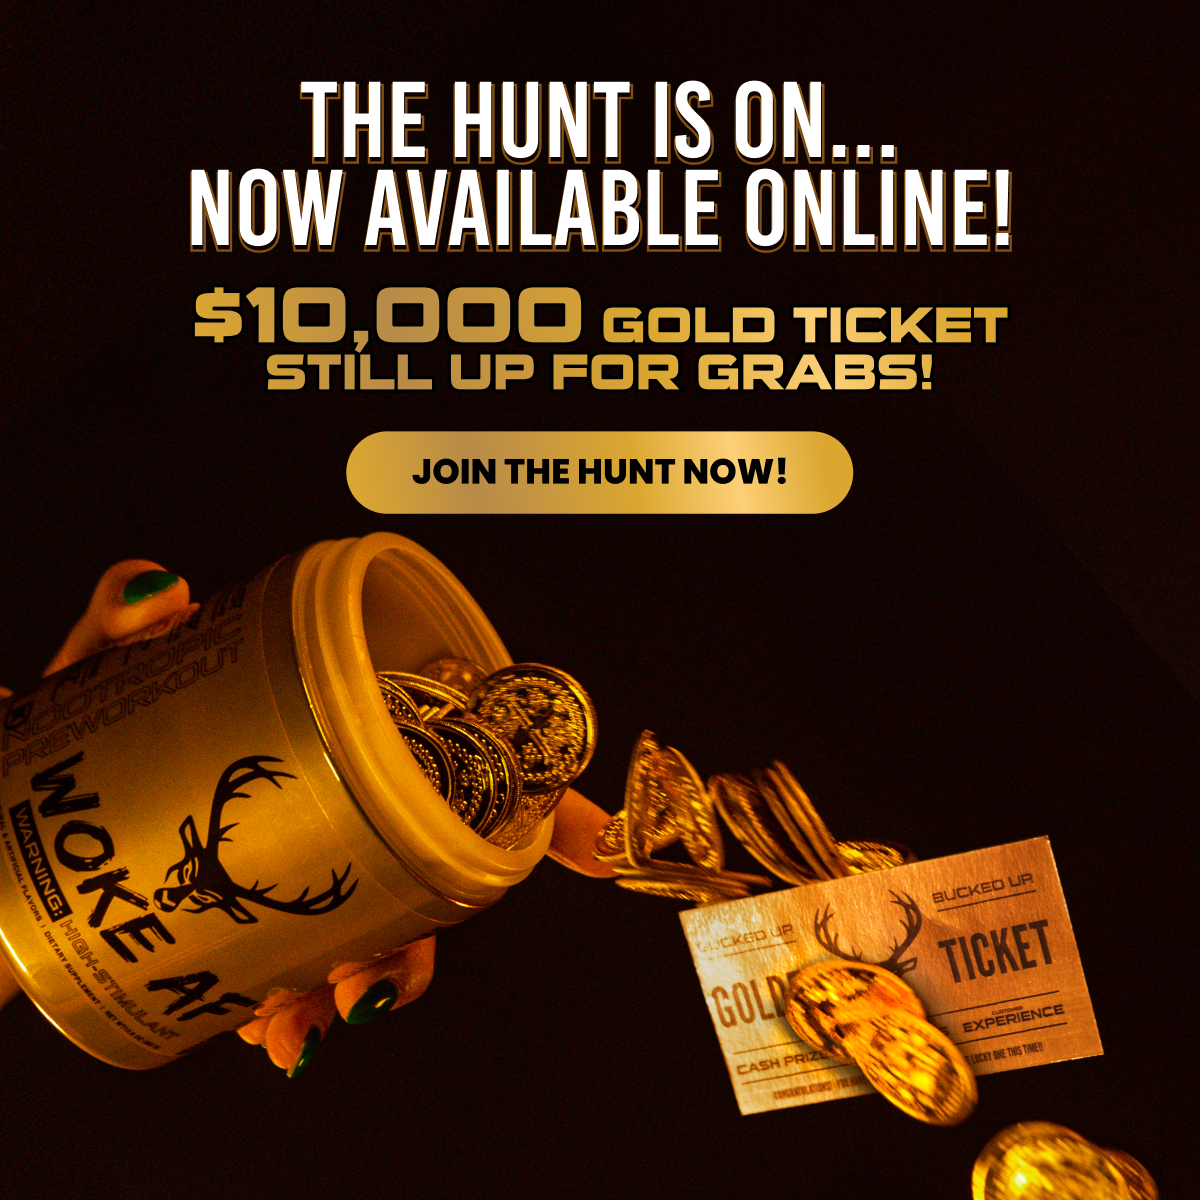 Bucked Up Gold - Text says "the hunt is on... now available online!  $10,000 gold ticket still up for grabs!" Button says "Join the hunt now!"  Image is of our Gold Pre-Workout tub (bucked up or woke af) and gold coins with a golden ti